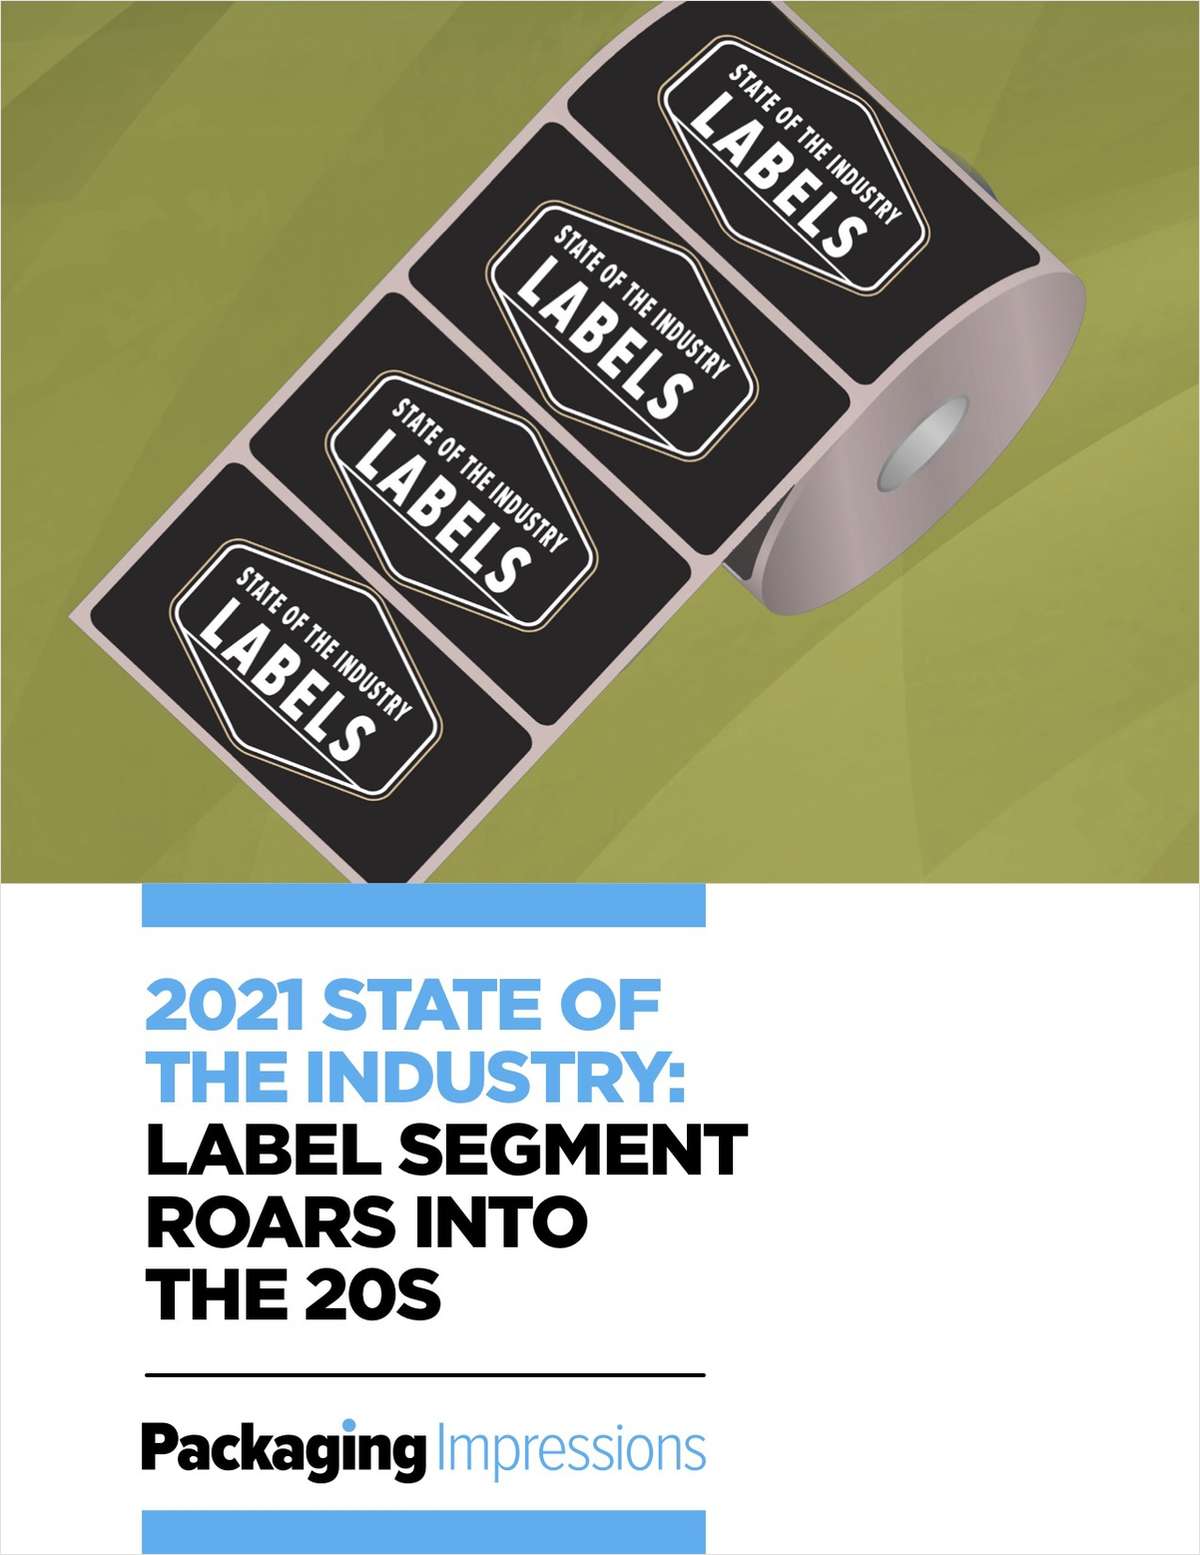 2021 State of the Industry: Label Segment Roars Into the 20s